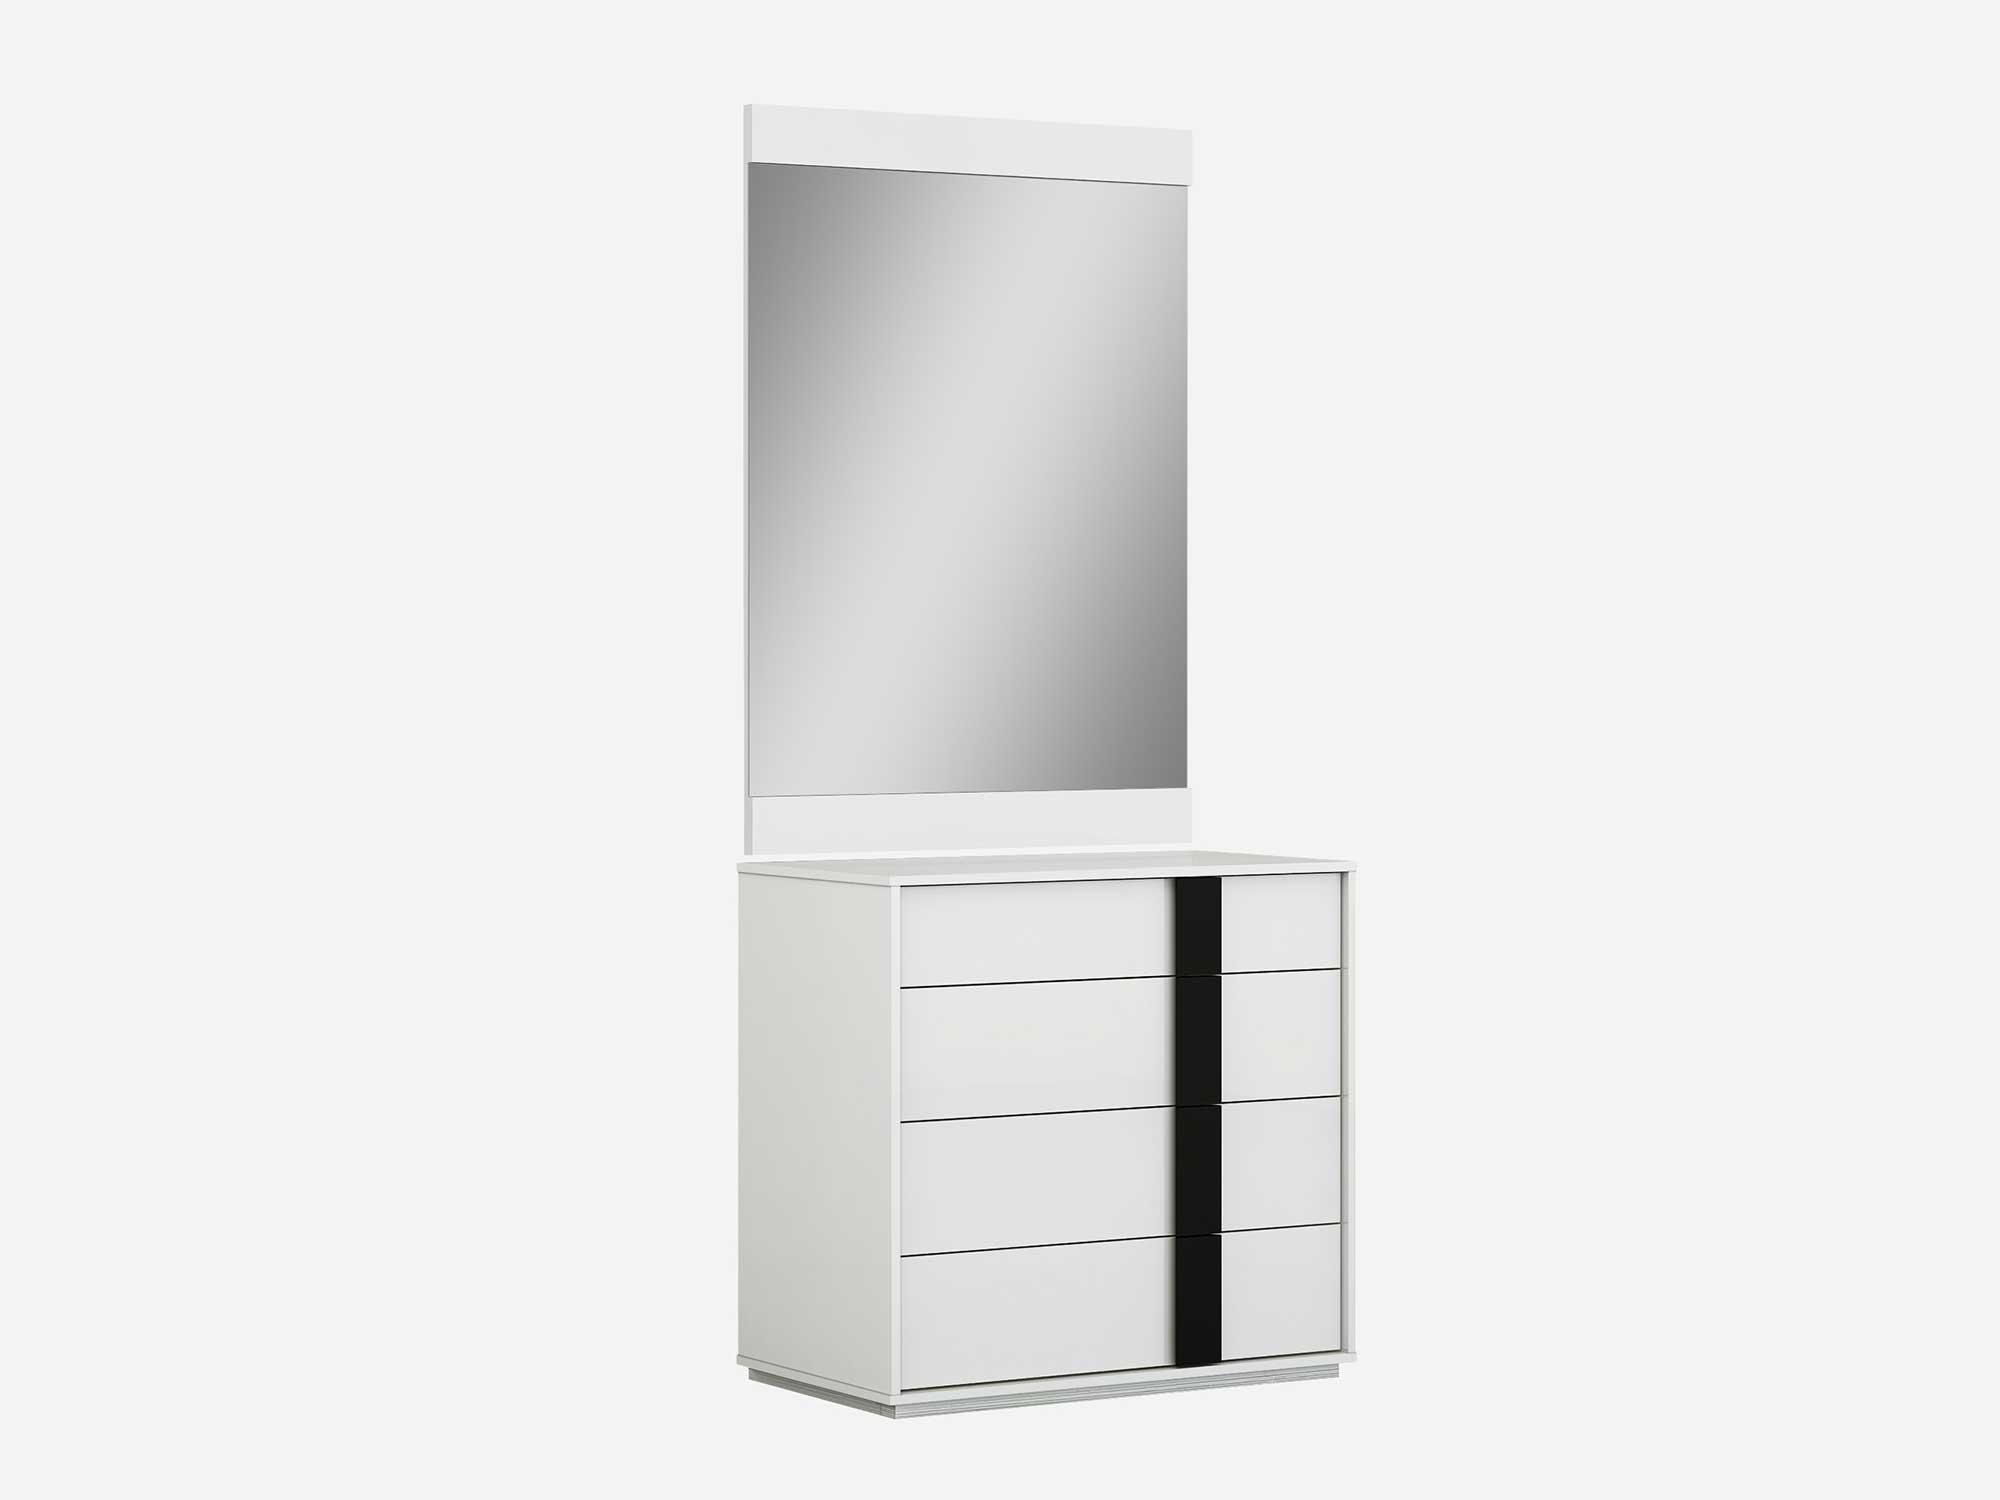 Contemporary Dresser DR1617S-WHT/BLK Kimberly DR1617S-WHT/BLK in White 